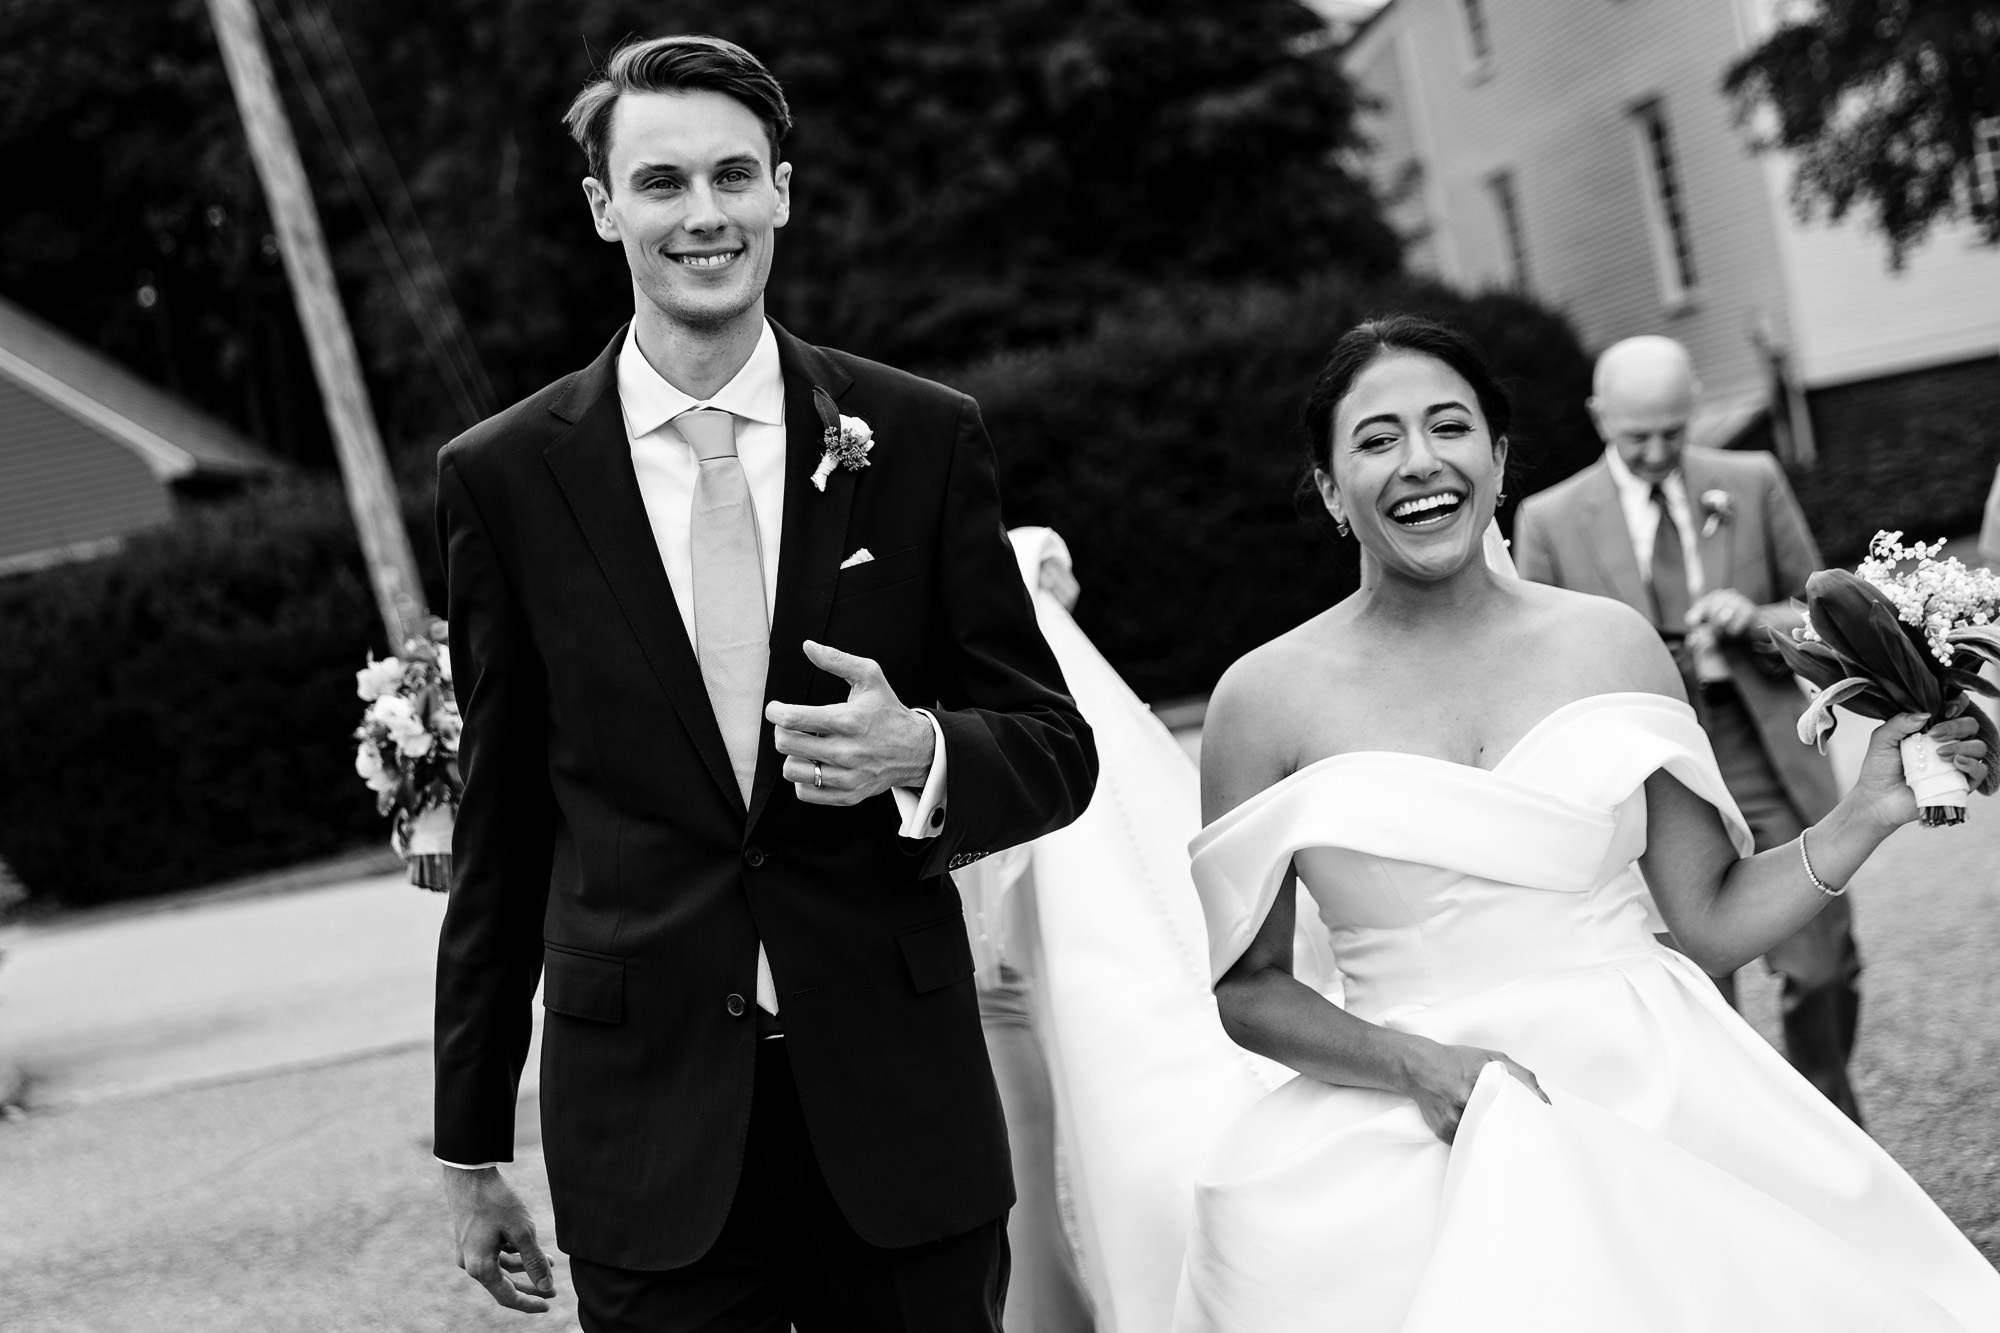 A happy wedding couple after their wedding ceremony in Portsmouth, NH